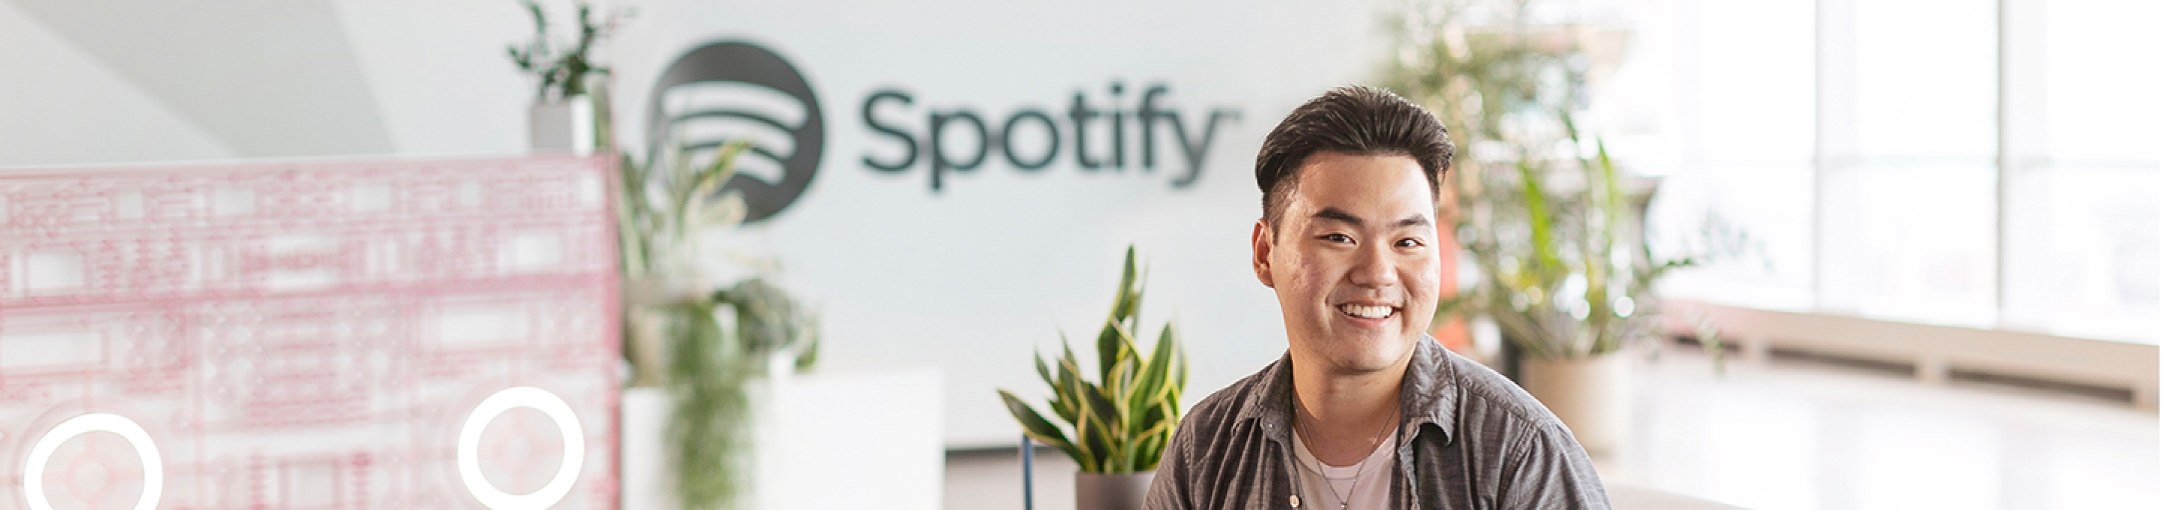 Man posing in front of a spotify sign with plants